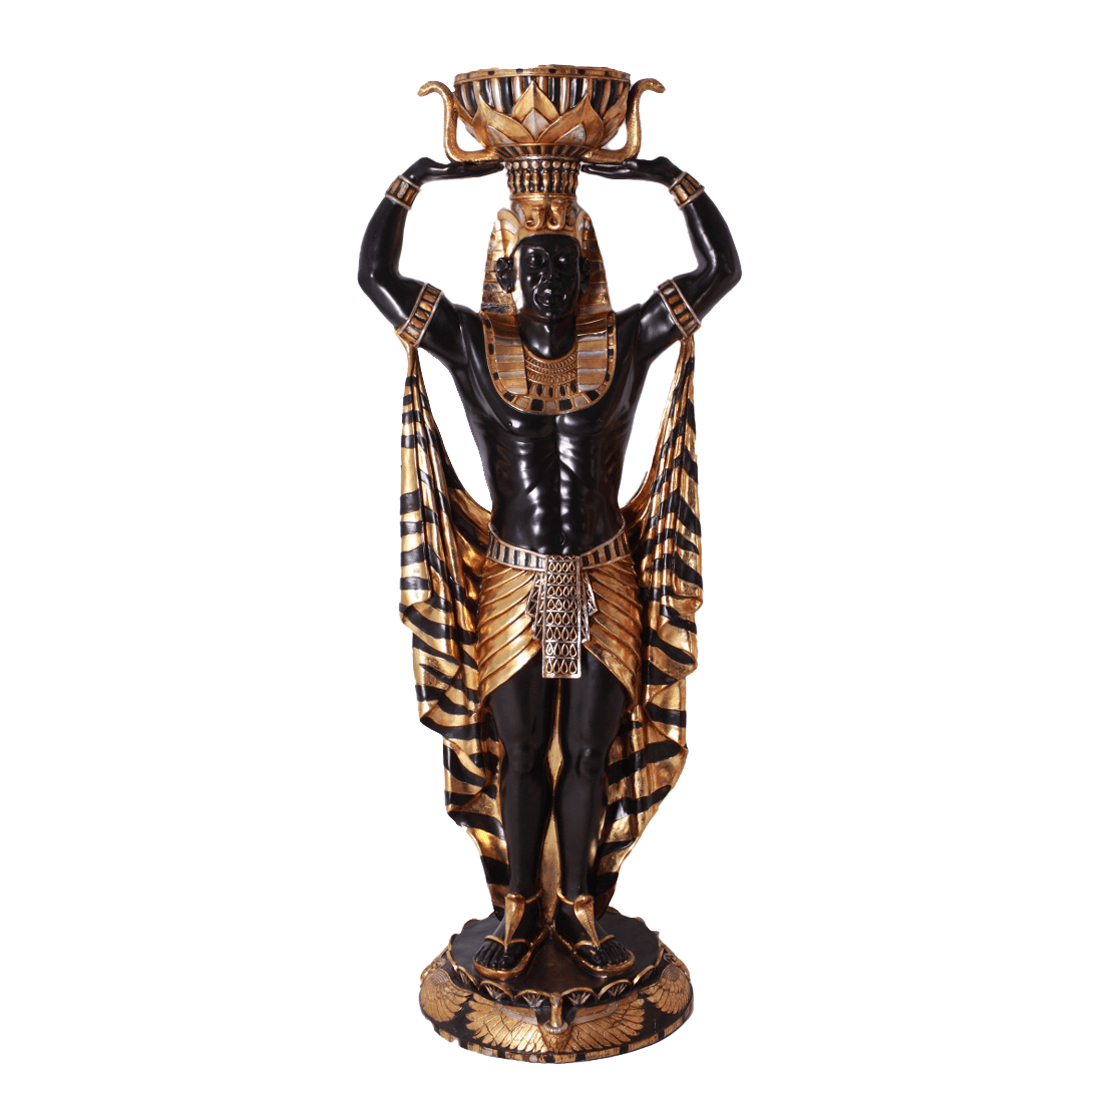 Egyptian Plant Holder Male Life Size Statue - LM Treasures Prop Rentals 